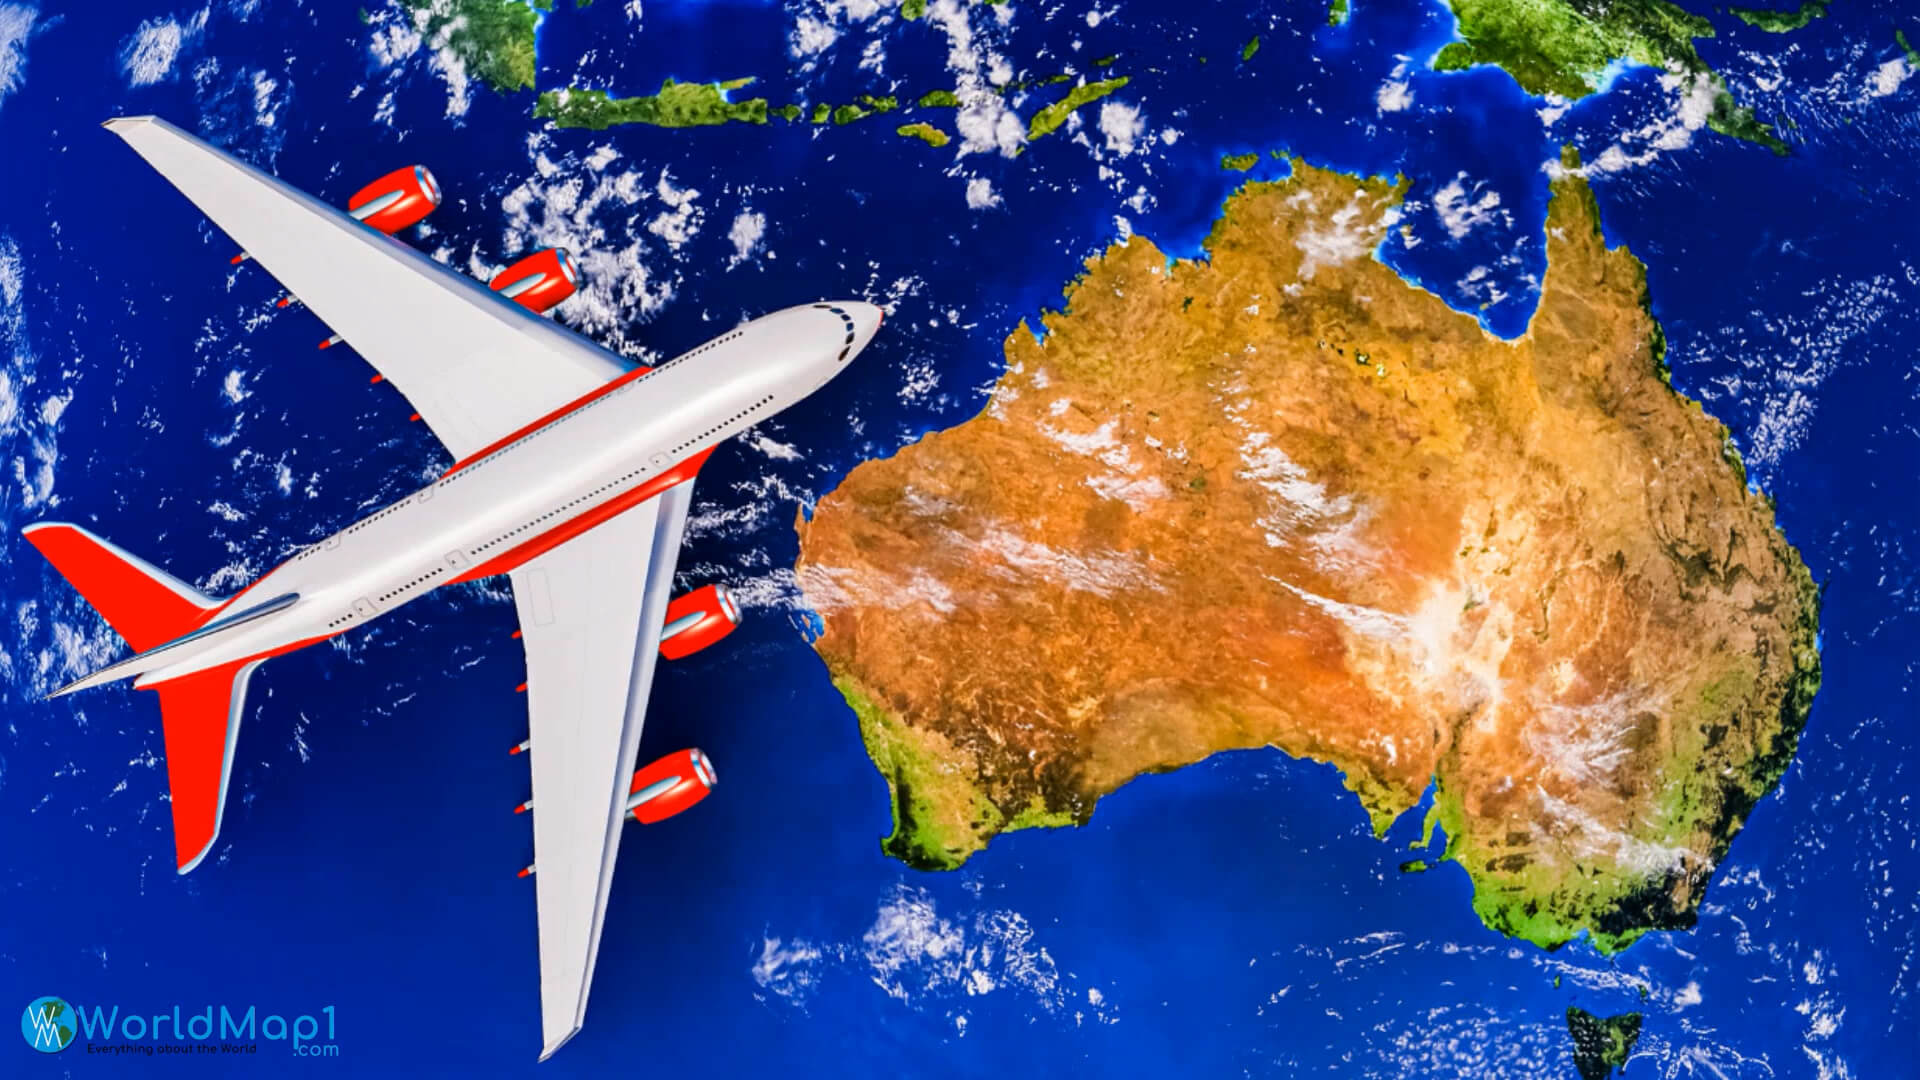 Australia and Oceania Airline Map